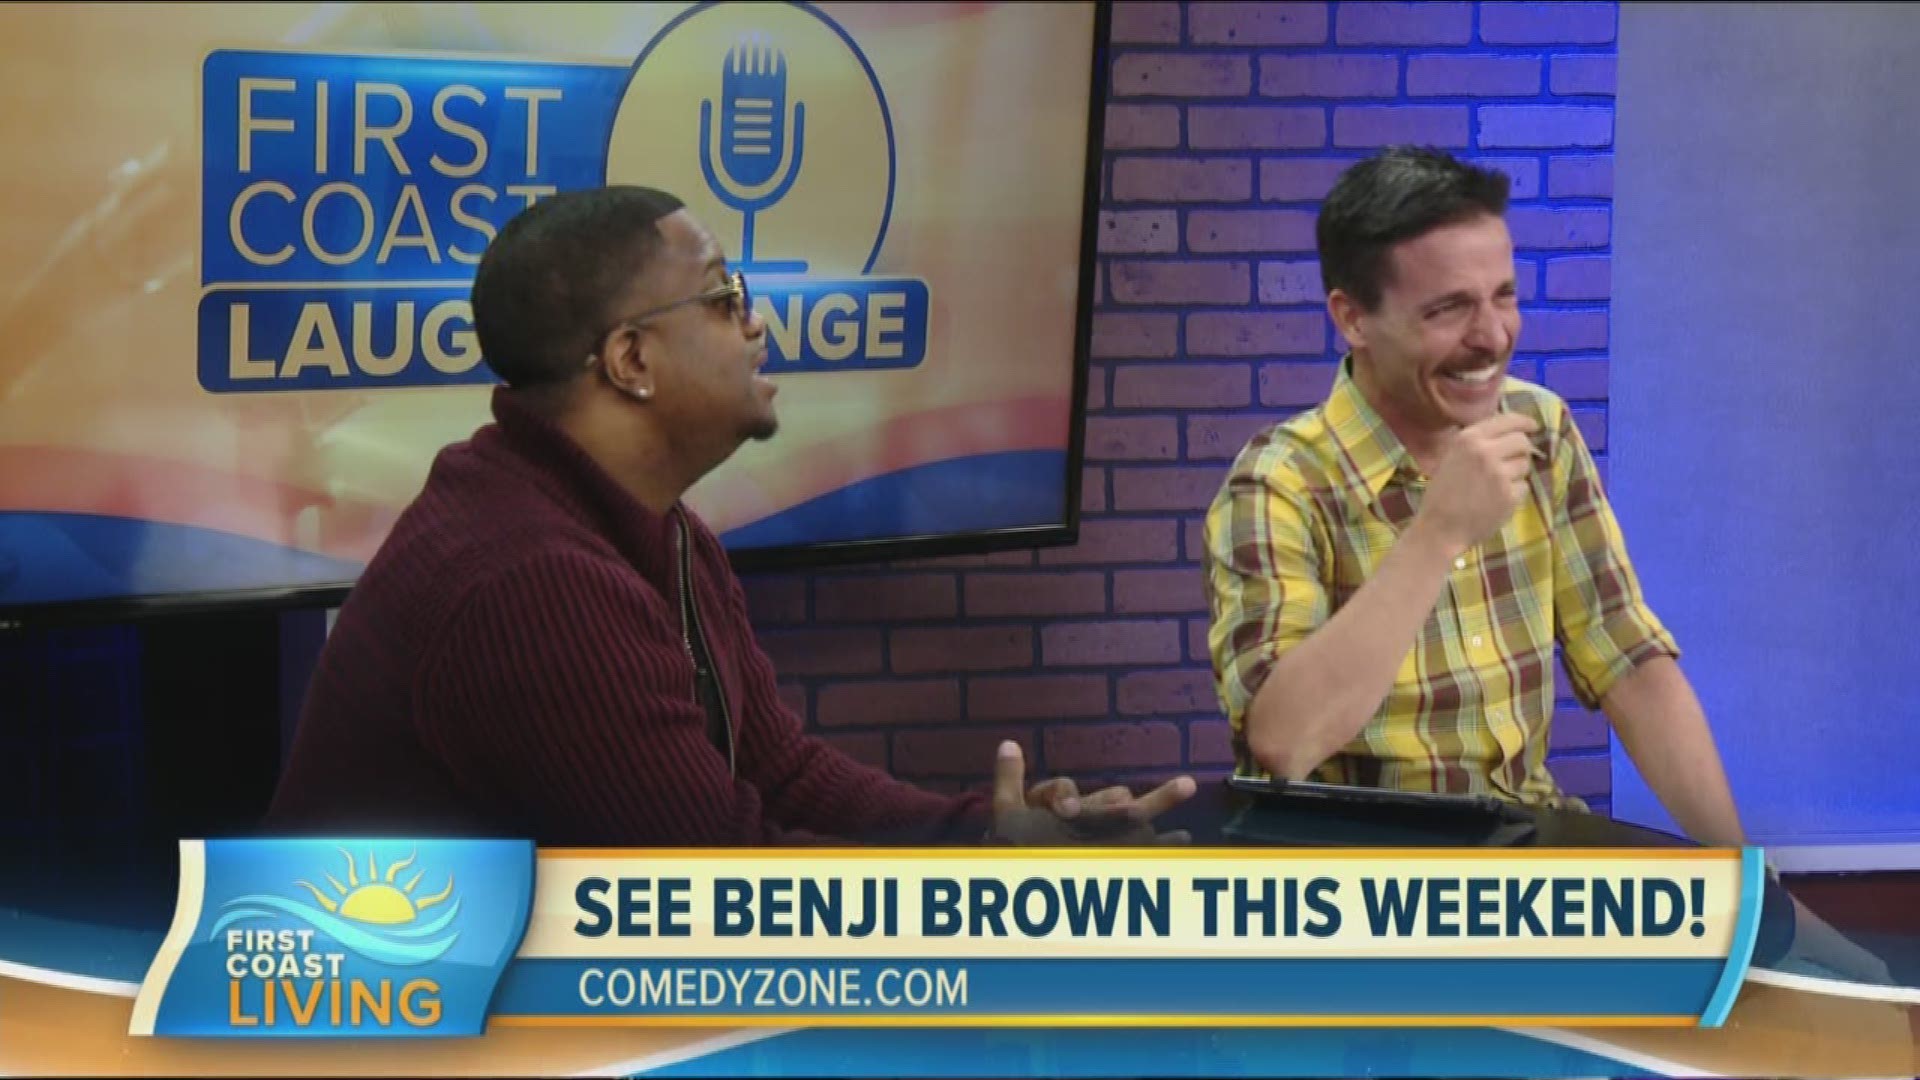 Comedian Benji Brown gets ready to take the stage at The Comedy Zone, but not before he stops by the laugh lounge and brings Curtis Dvorak to tears with his characters.